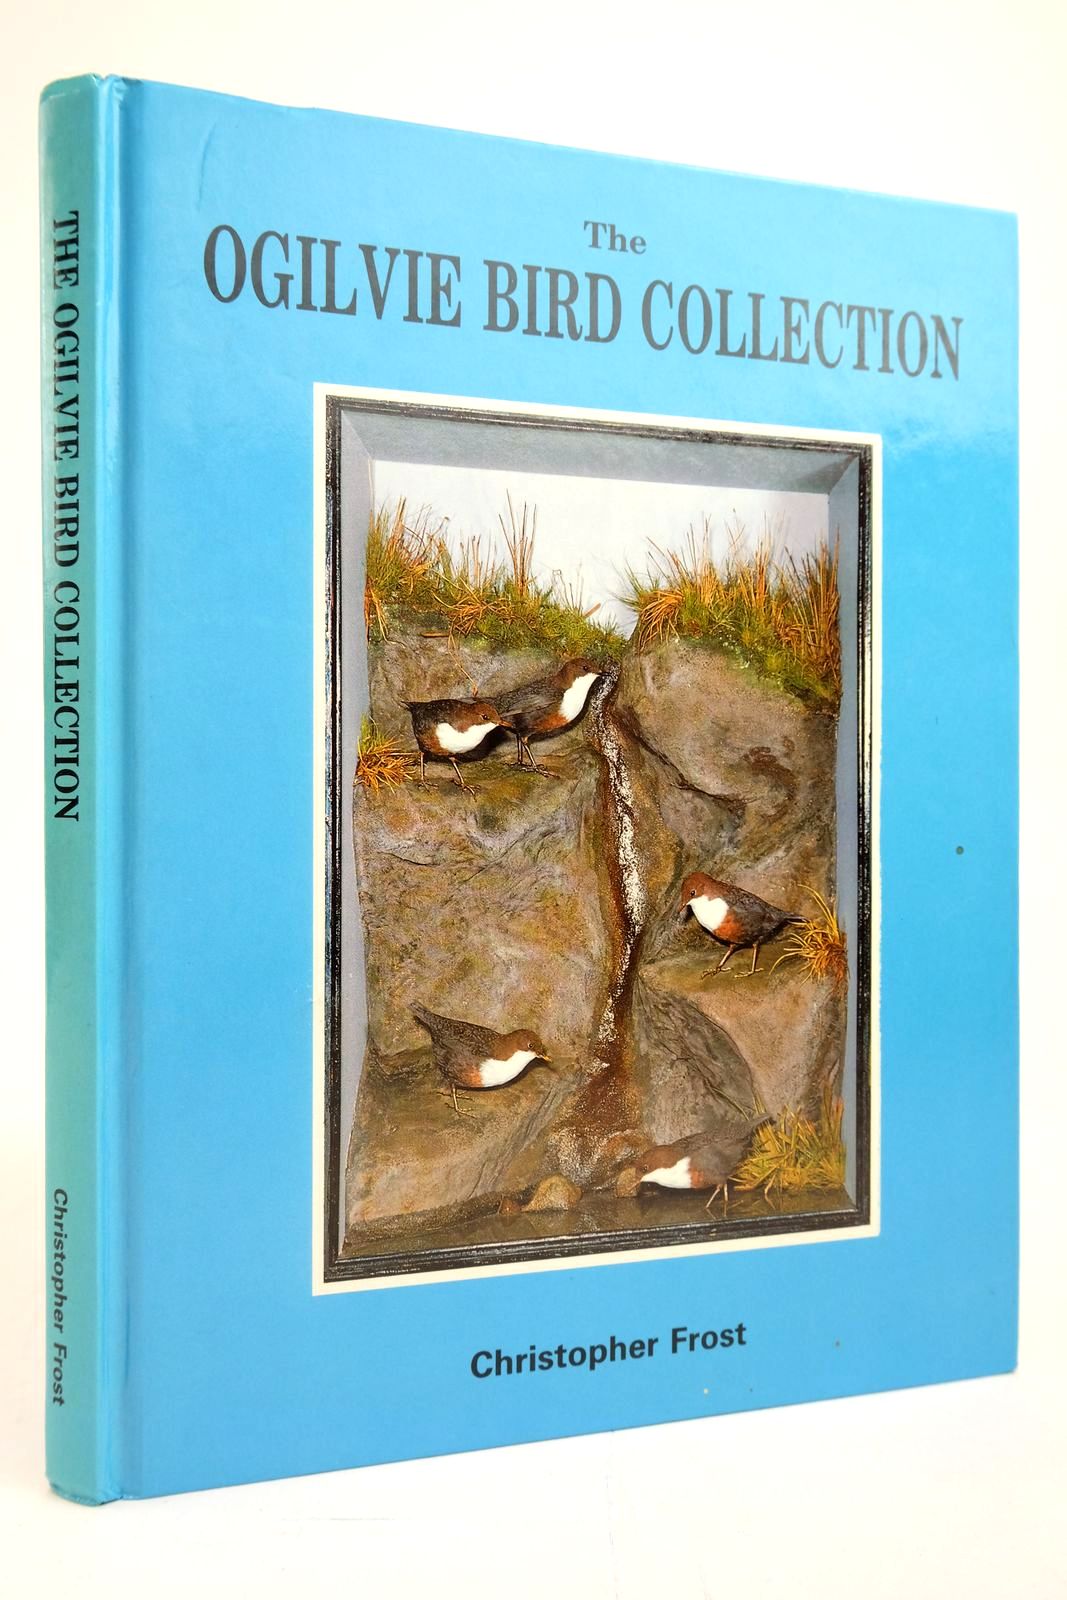 Photo of THE OGILVIE BIRD COLLECTION written by Frost, Christopher illustrated by Frost, Christopher published by Christopher Frost (STOCK CODE: 2135327)  for sale by Stella & Rose's Books